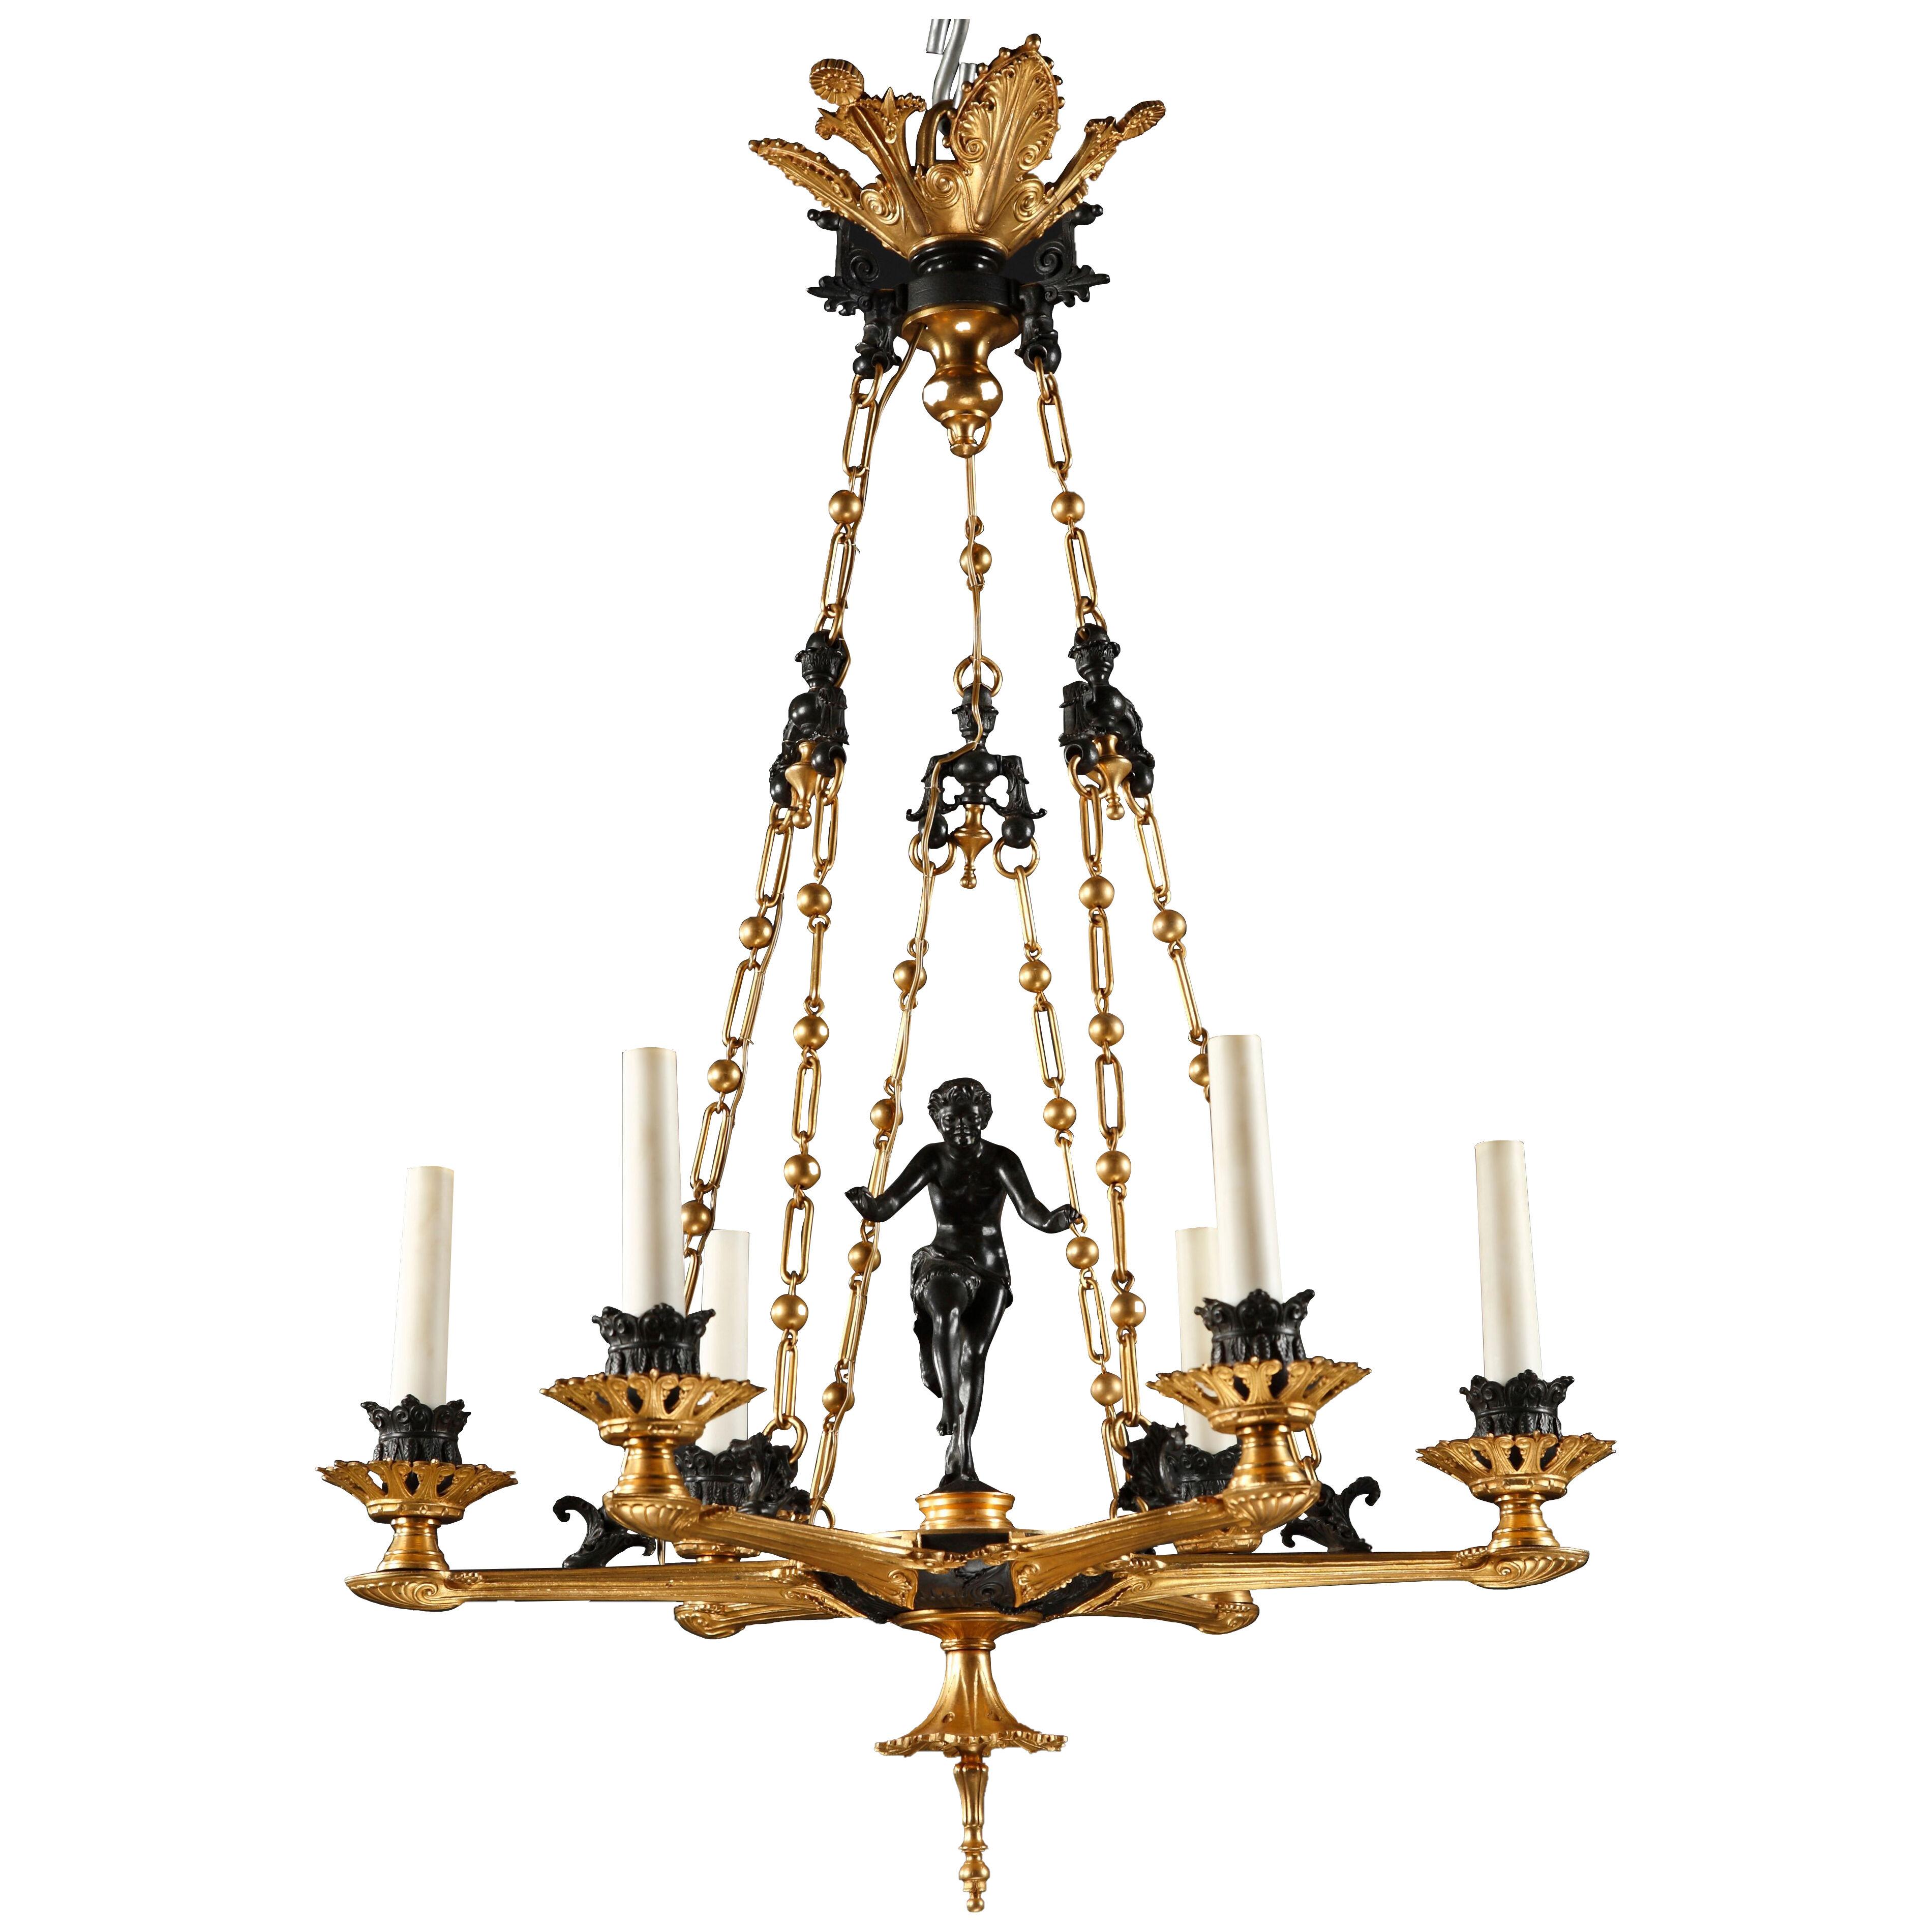  “Crotales Player” Chandelier Attributed to F. Barbedienne, France, Circa 1860